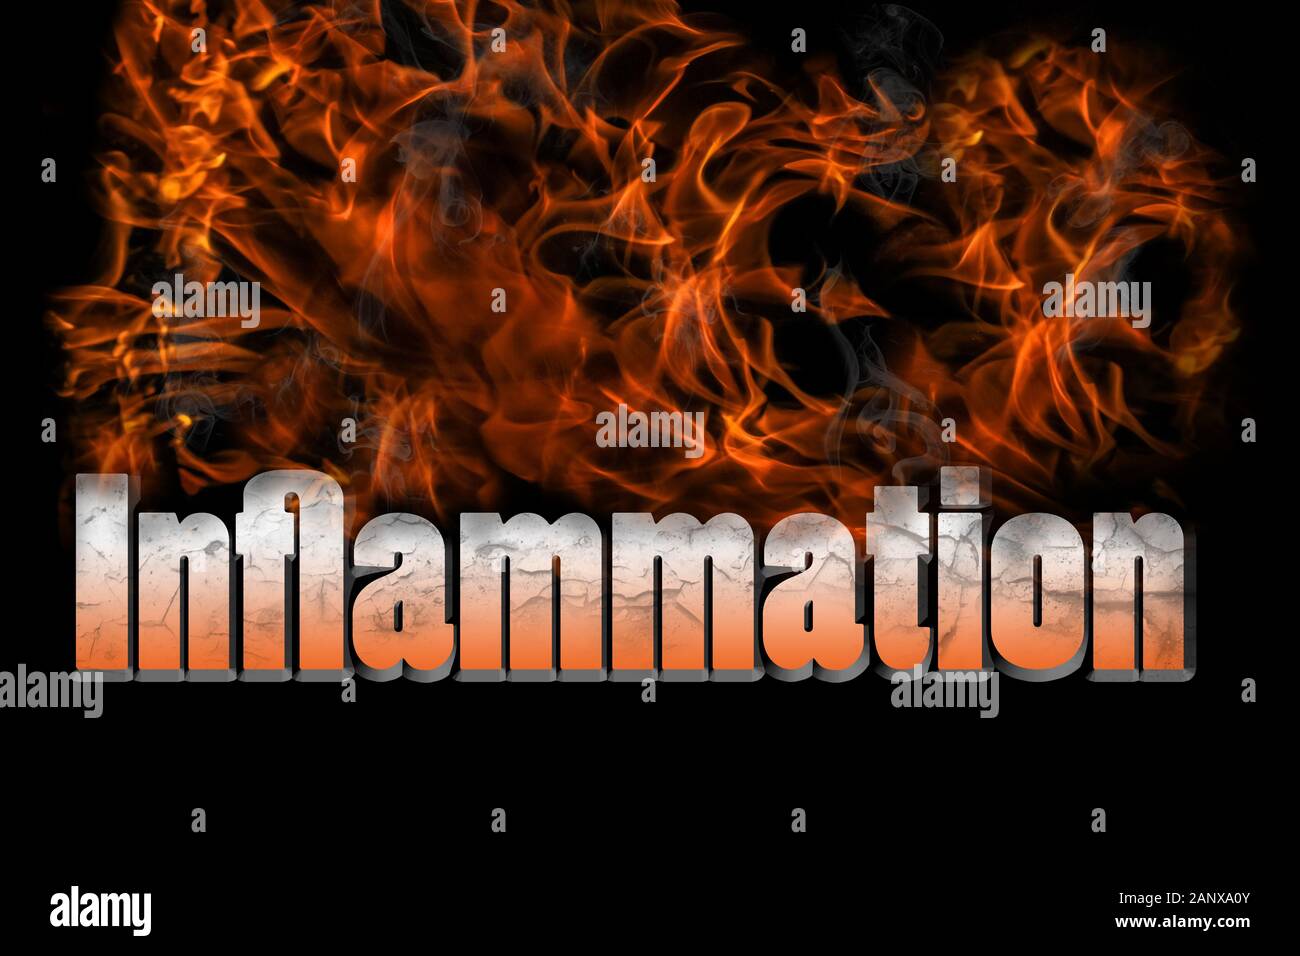 Inflammation 3D illustration fire text with crackled and burnt word with flames and smoke on a black background.  Great for medical and healthcare. Stock Photo